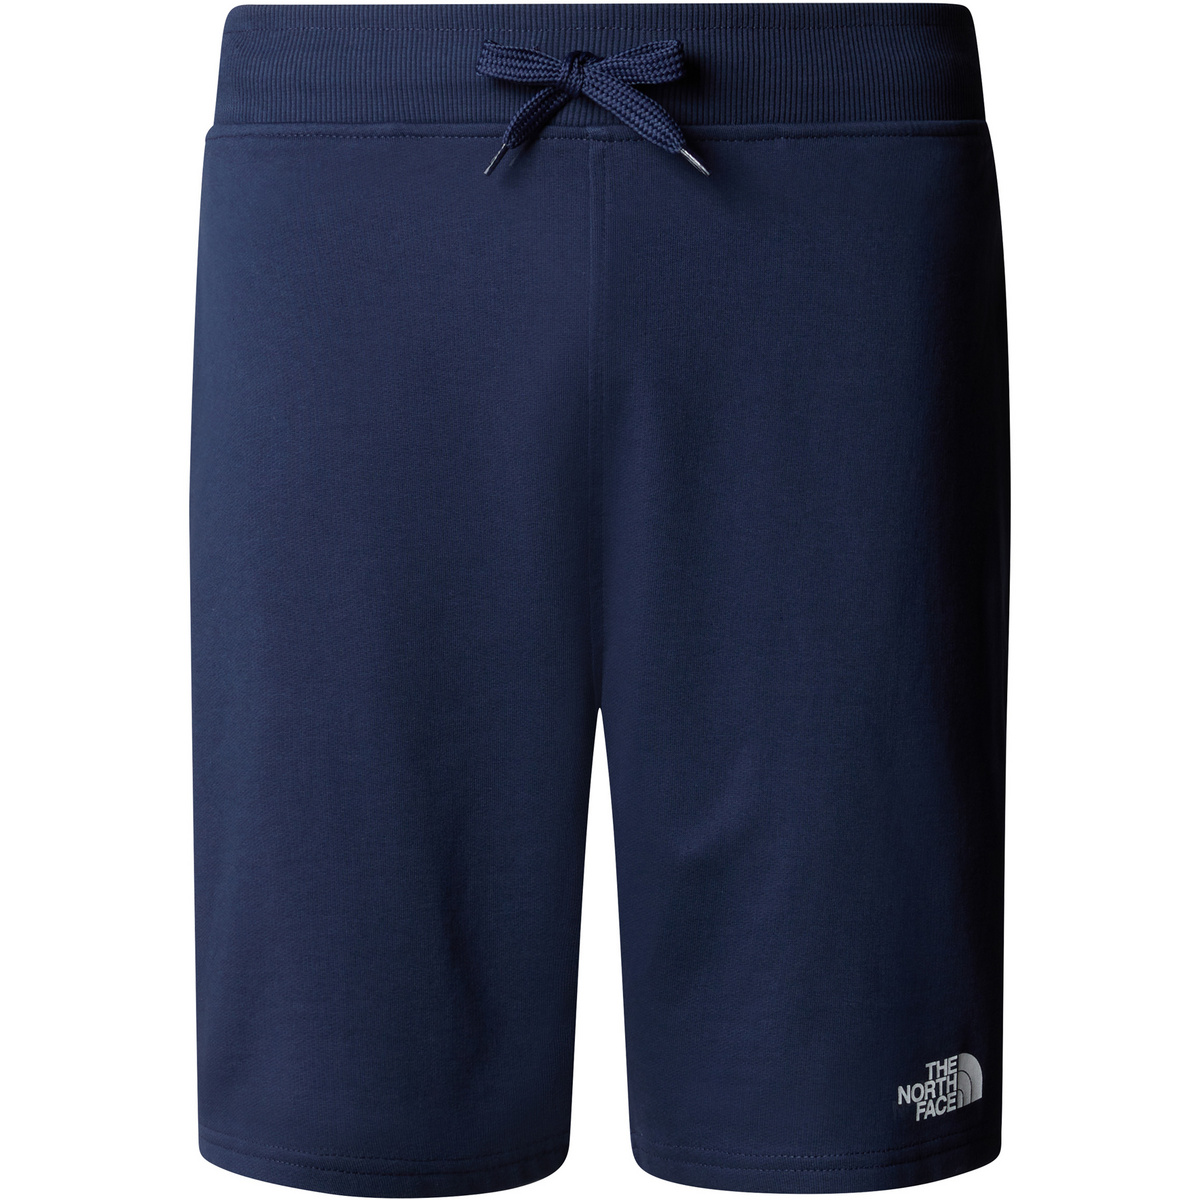 The North Face Herren Stand Light Shorts von The North Face